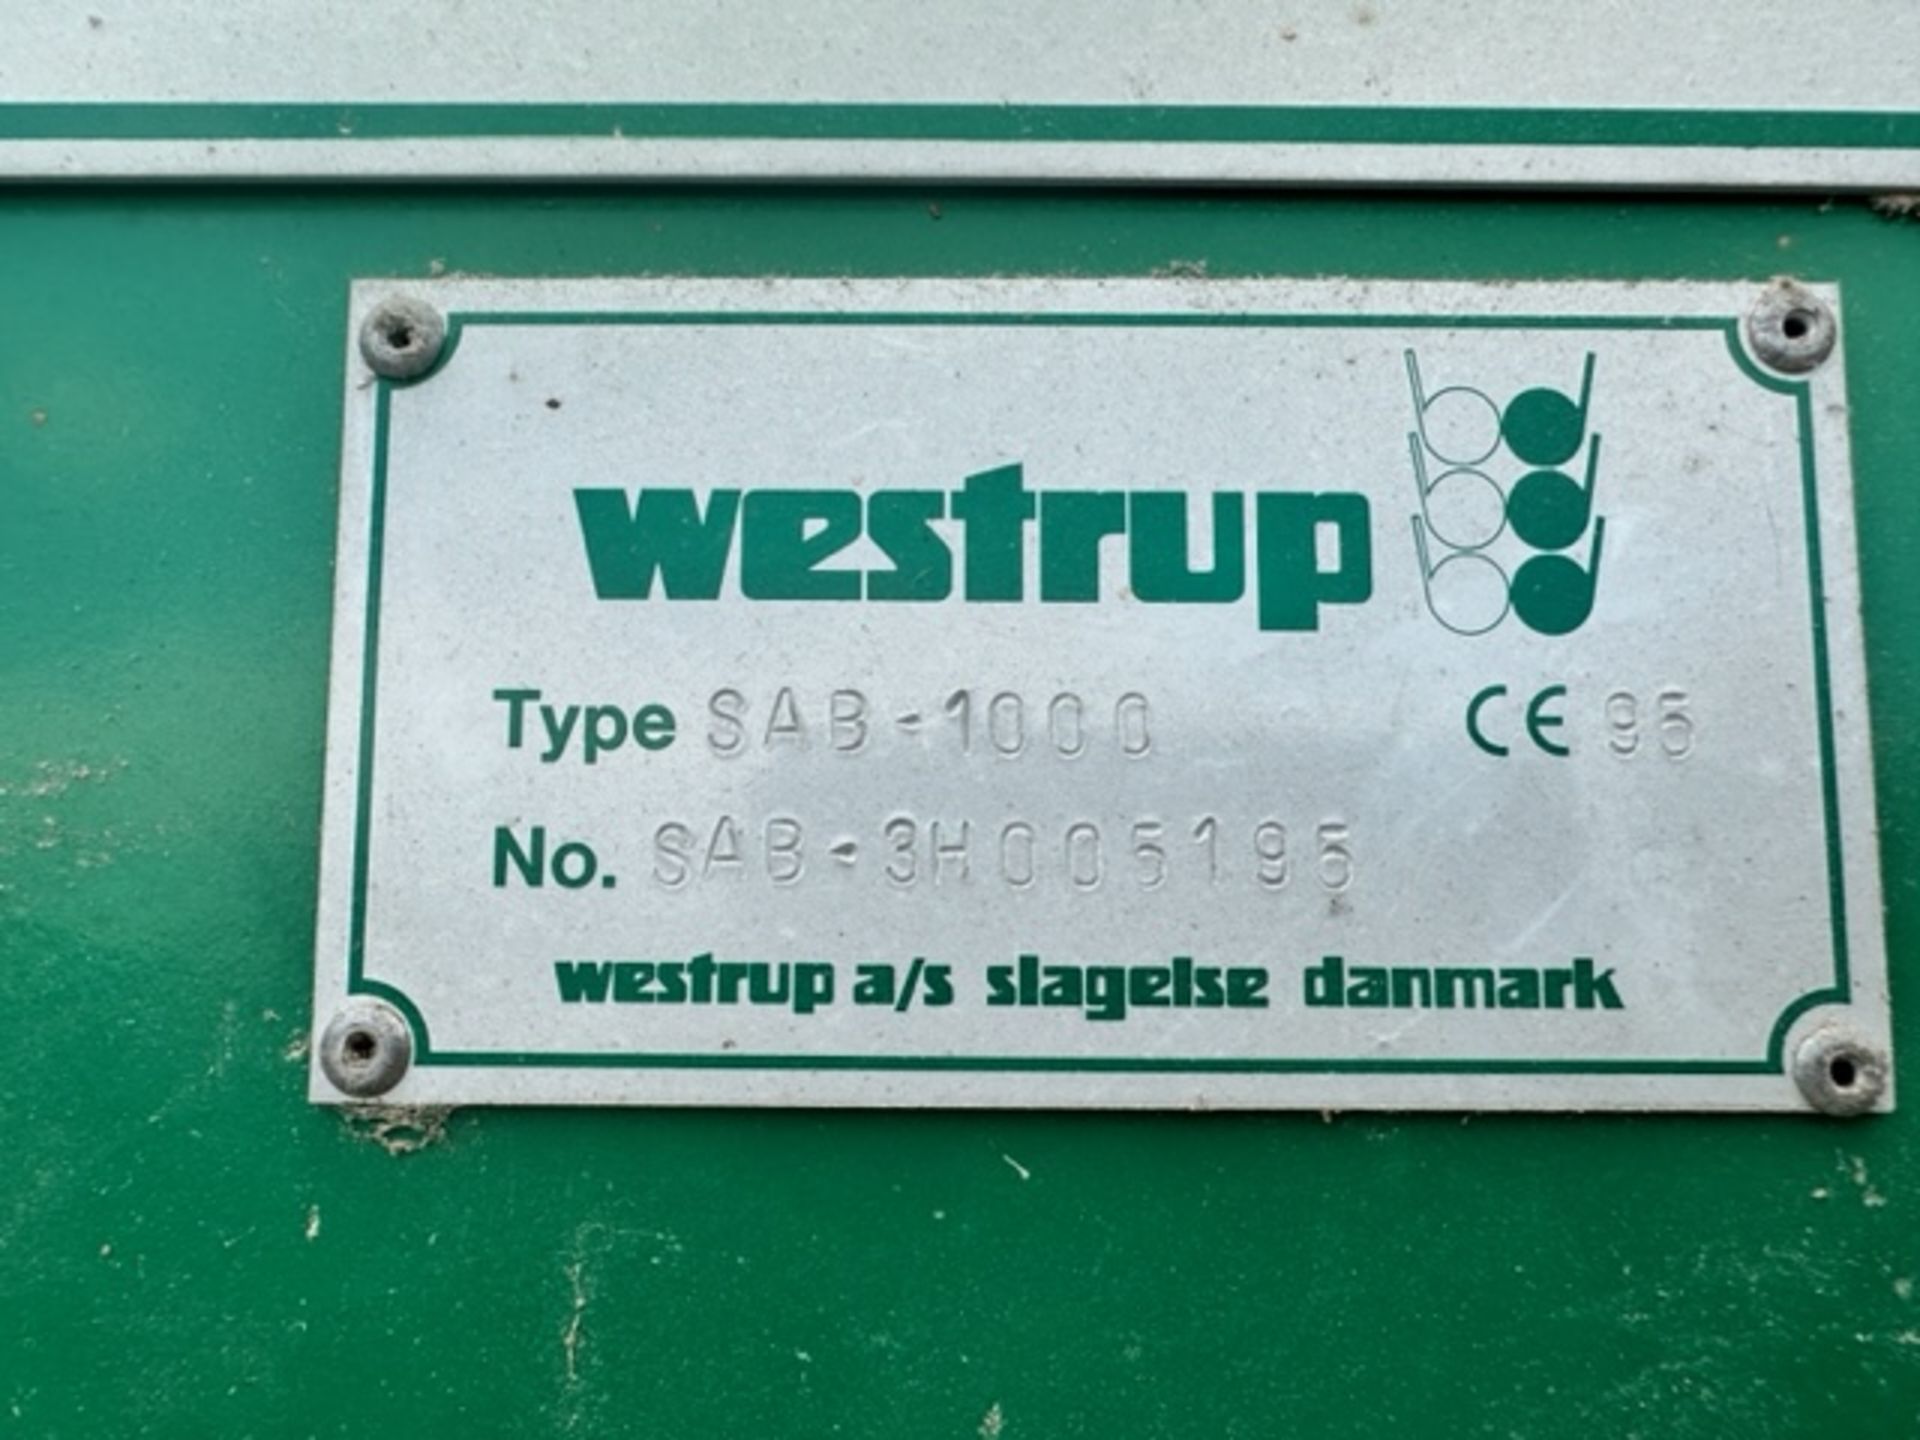 Westrup SAB-1000 Pre Cleaner Machine (no aspiration fan). Loading free of charge - yes. Lot location - Image 3 of 15